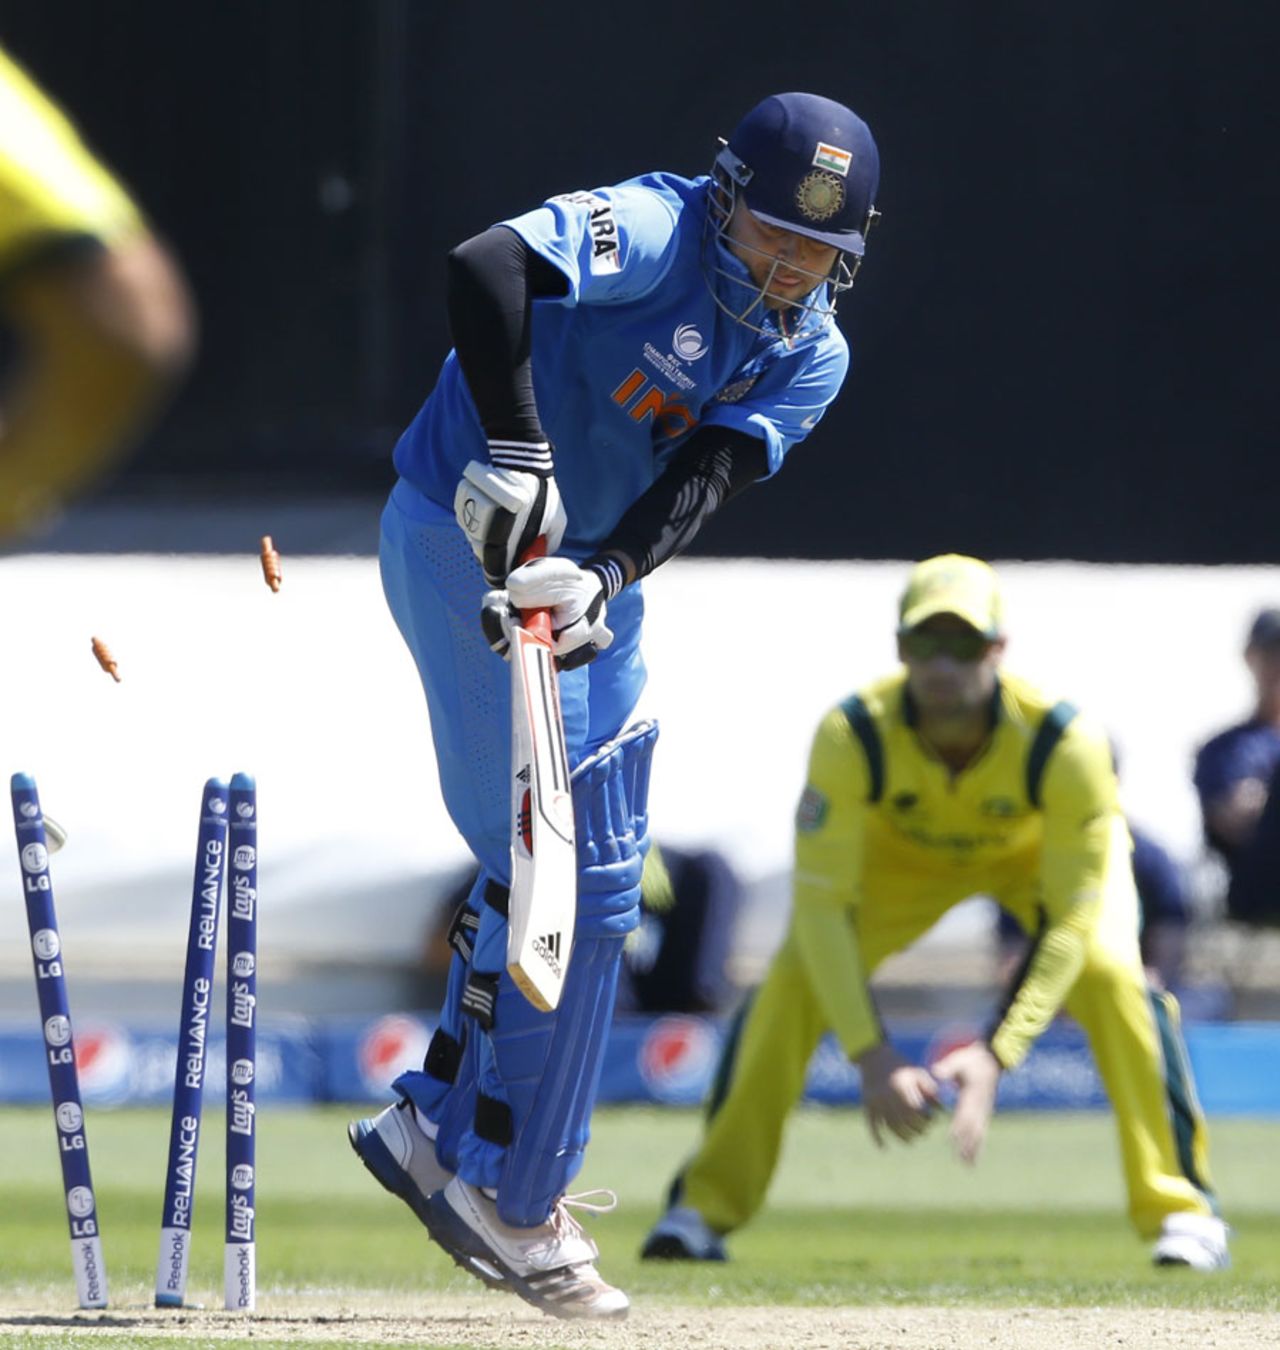 Suresh Raina is bowled by Clint McKay, Australia v India, Champions Trophy warm-up, Cardiff, June 4, 2013
